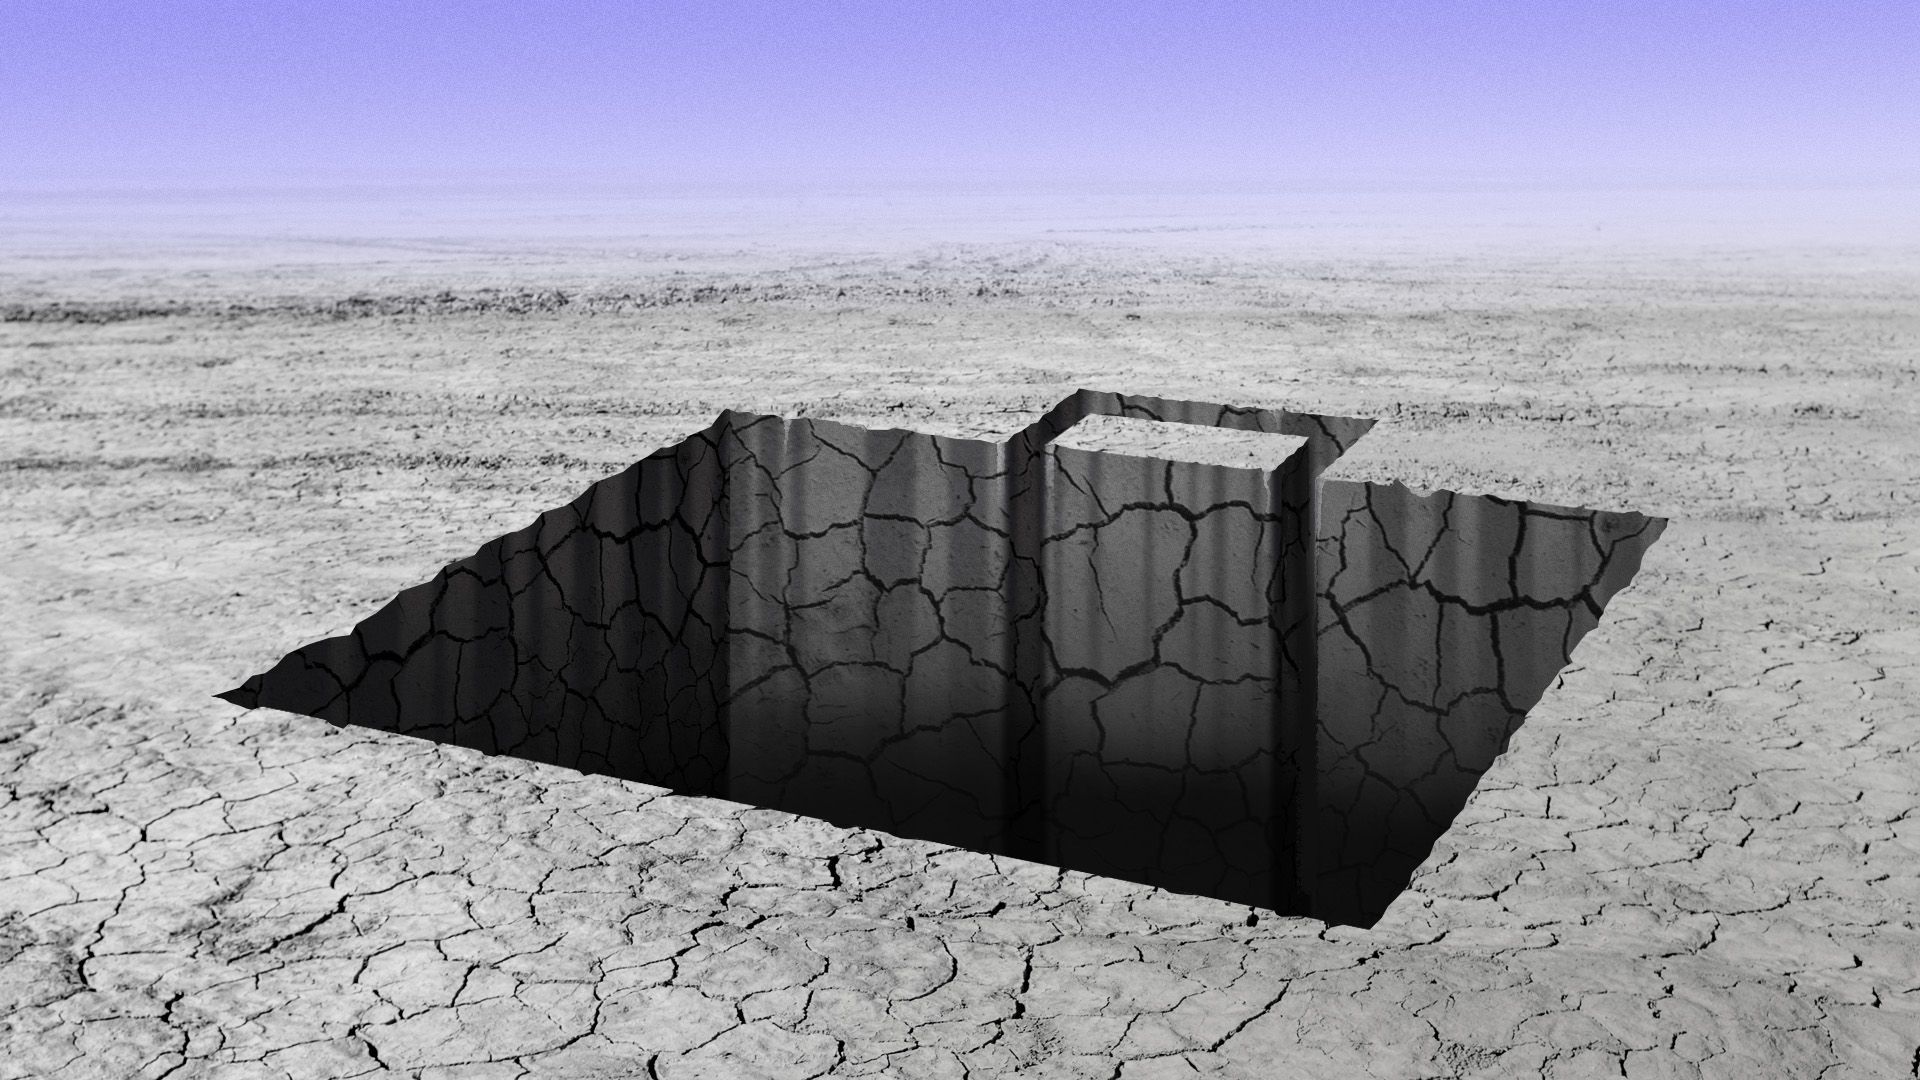 Illustration of a giant hole in the ground shaped like a briefcase